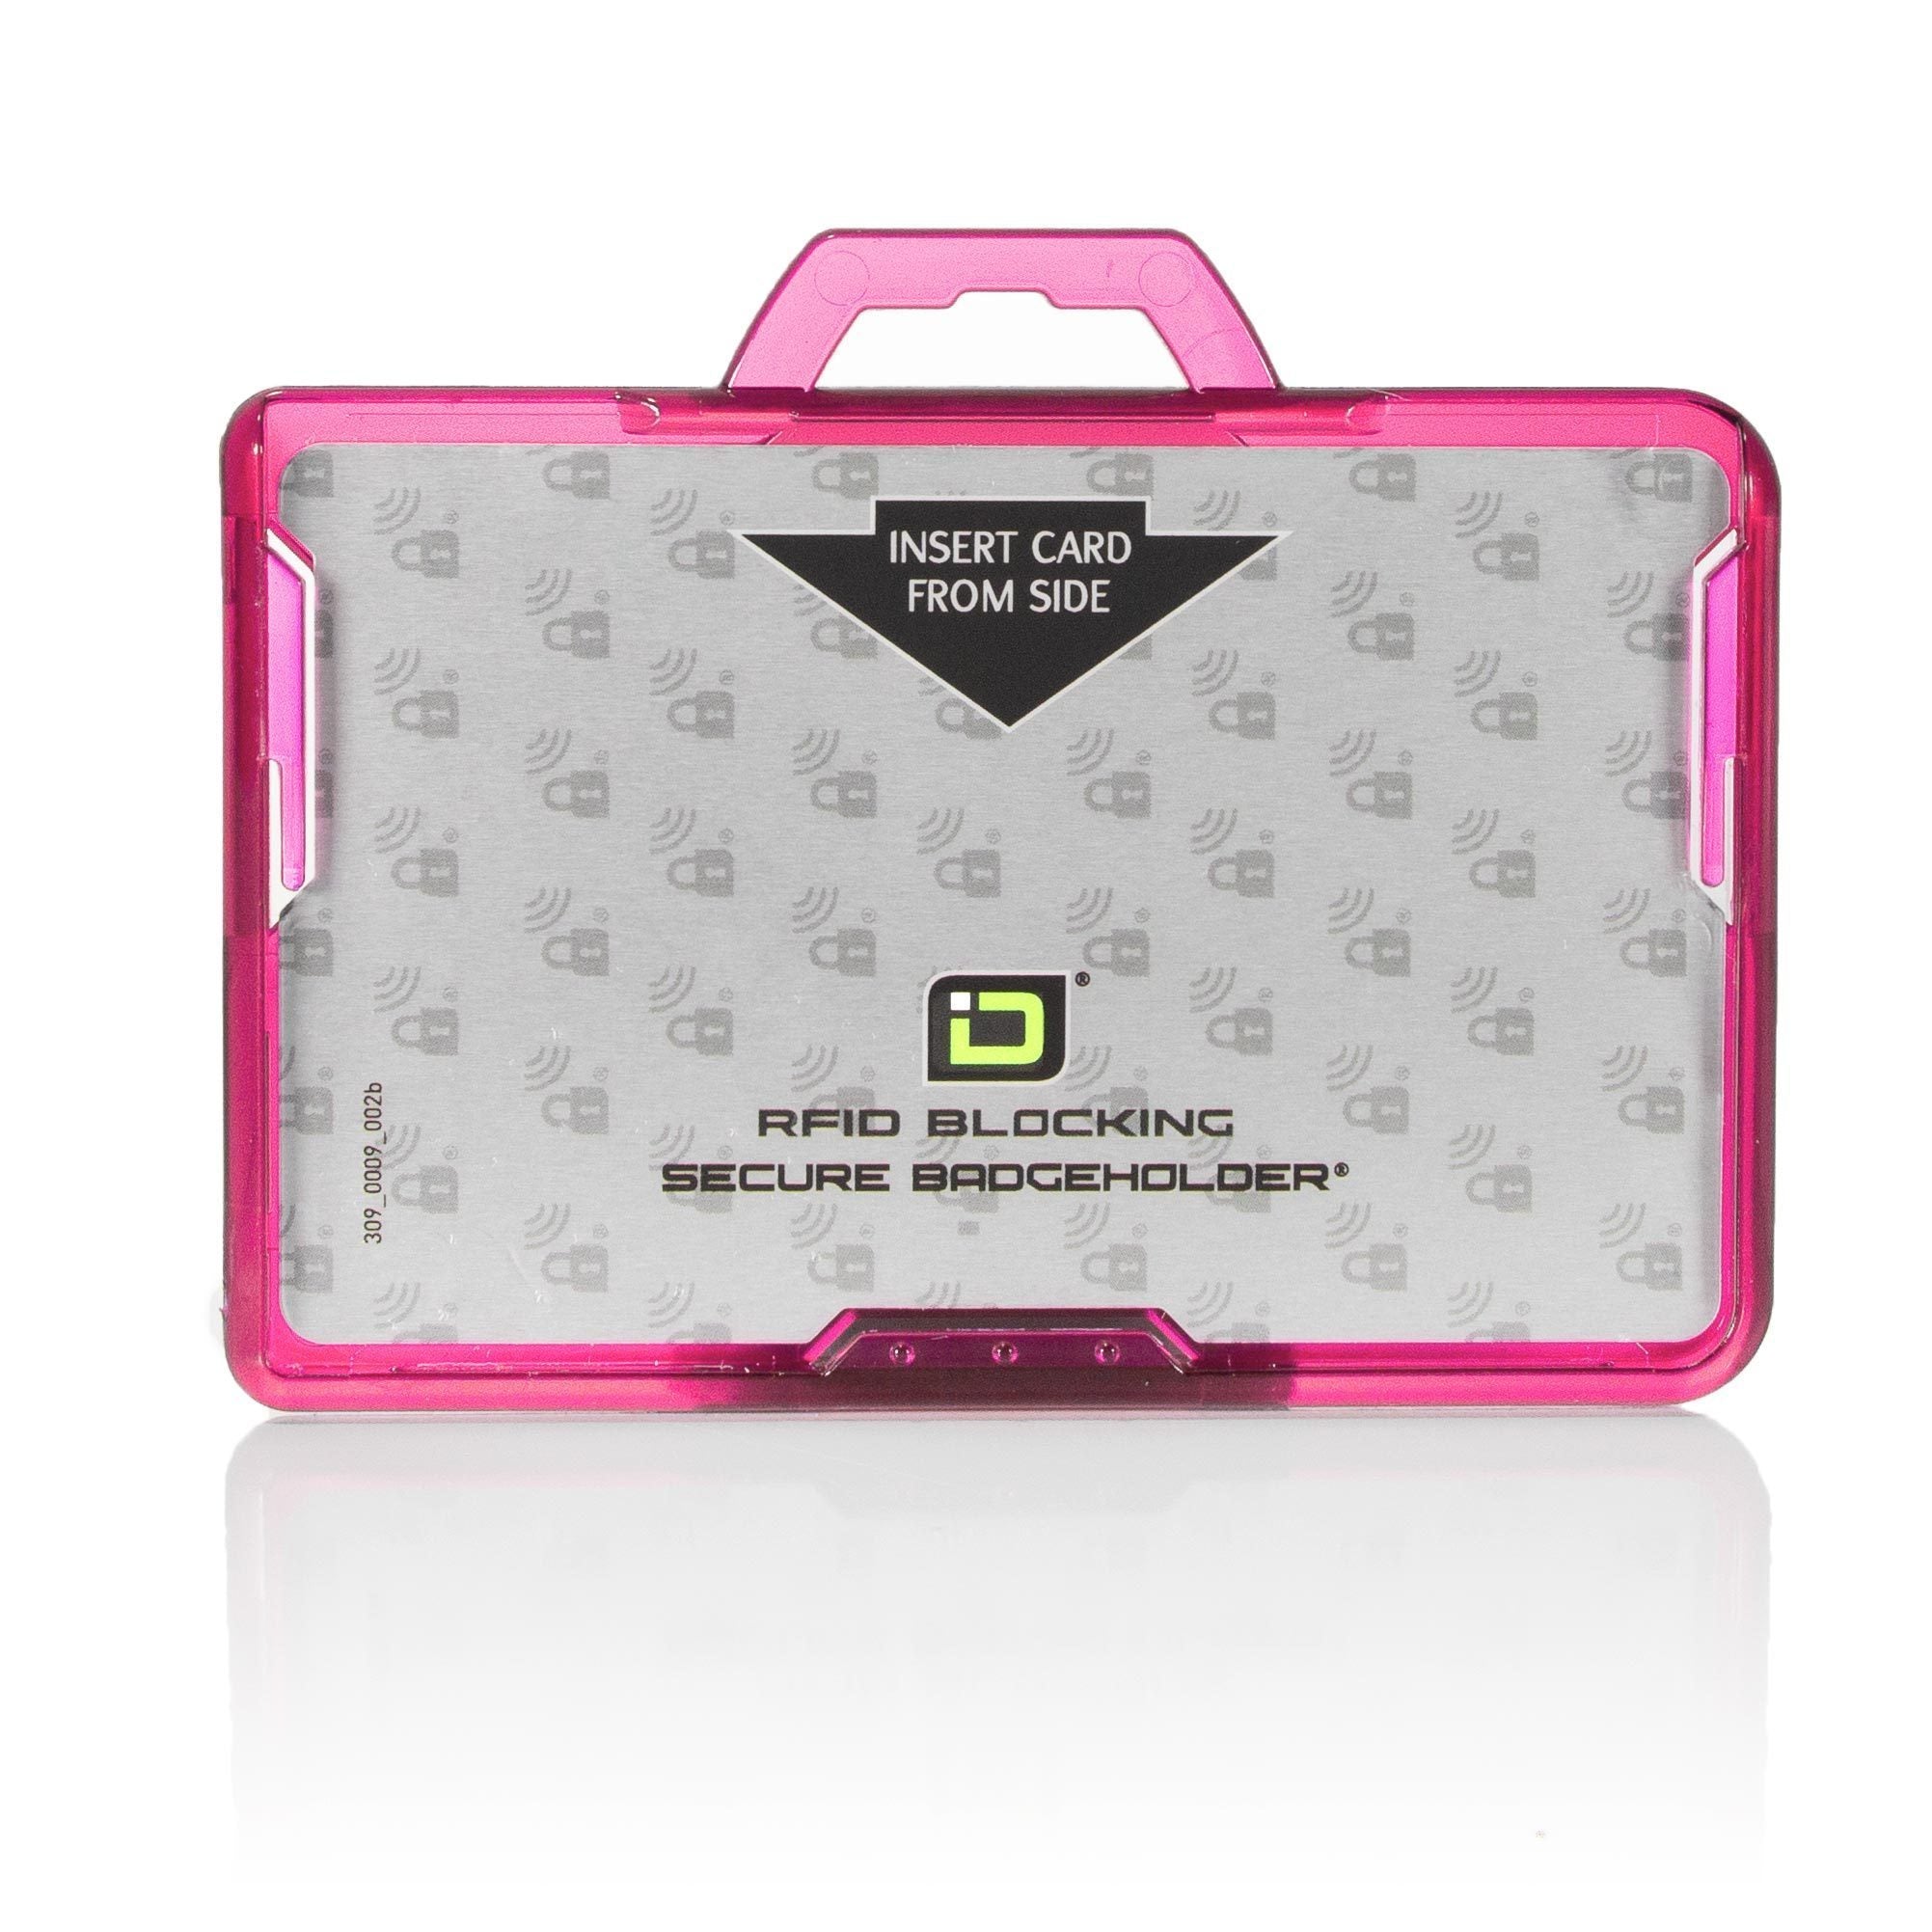 ID Stronghold Badgeholder BloxProx Pink Secure Badge Bolder BloxProx™ Lite LANDSCAPE - Protects 125Khz HID Prox